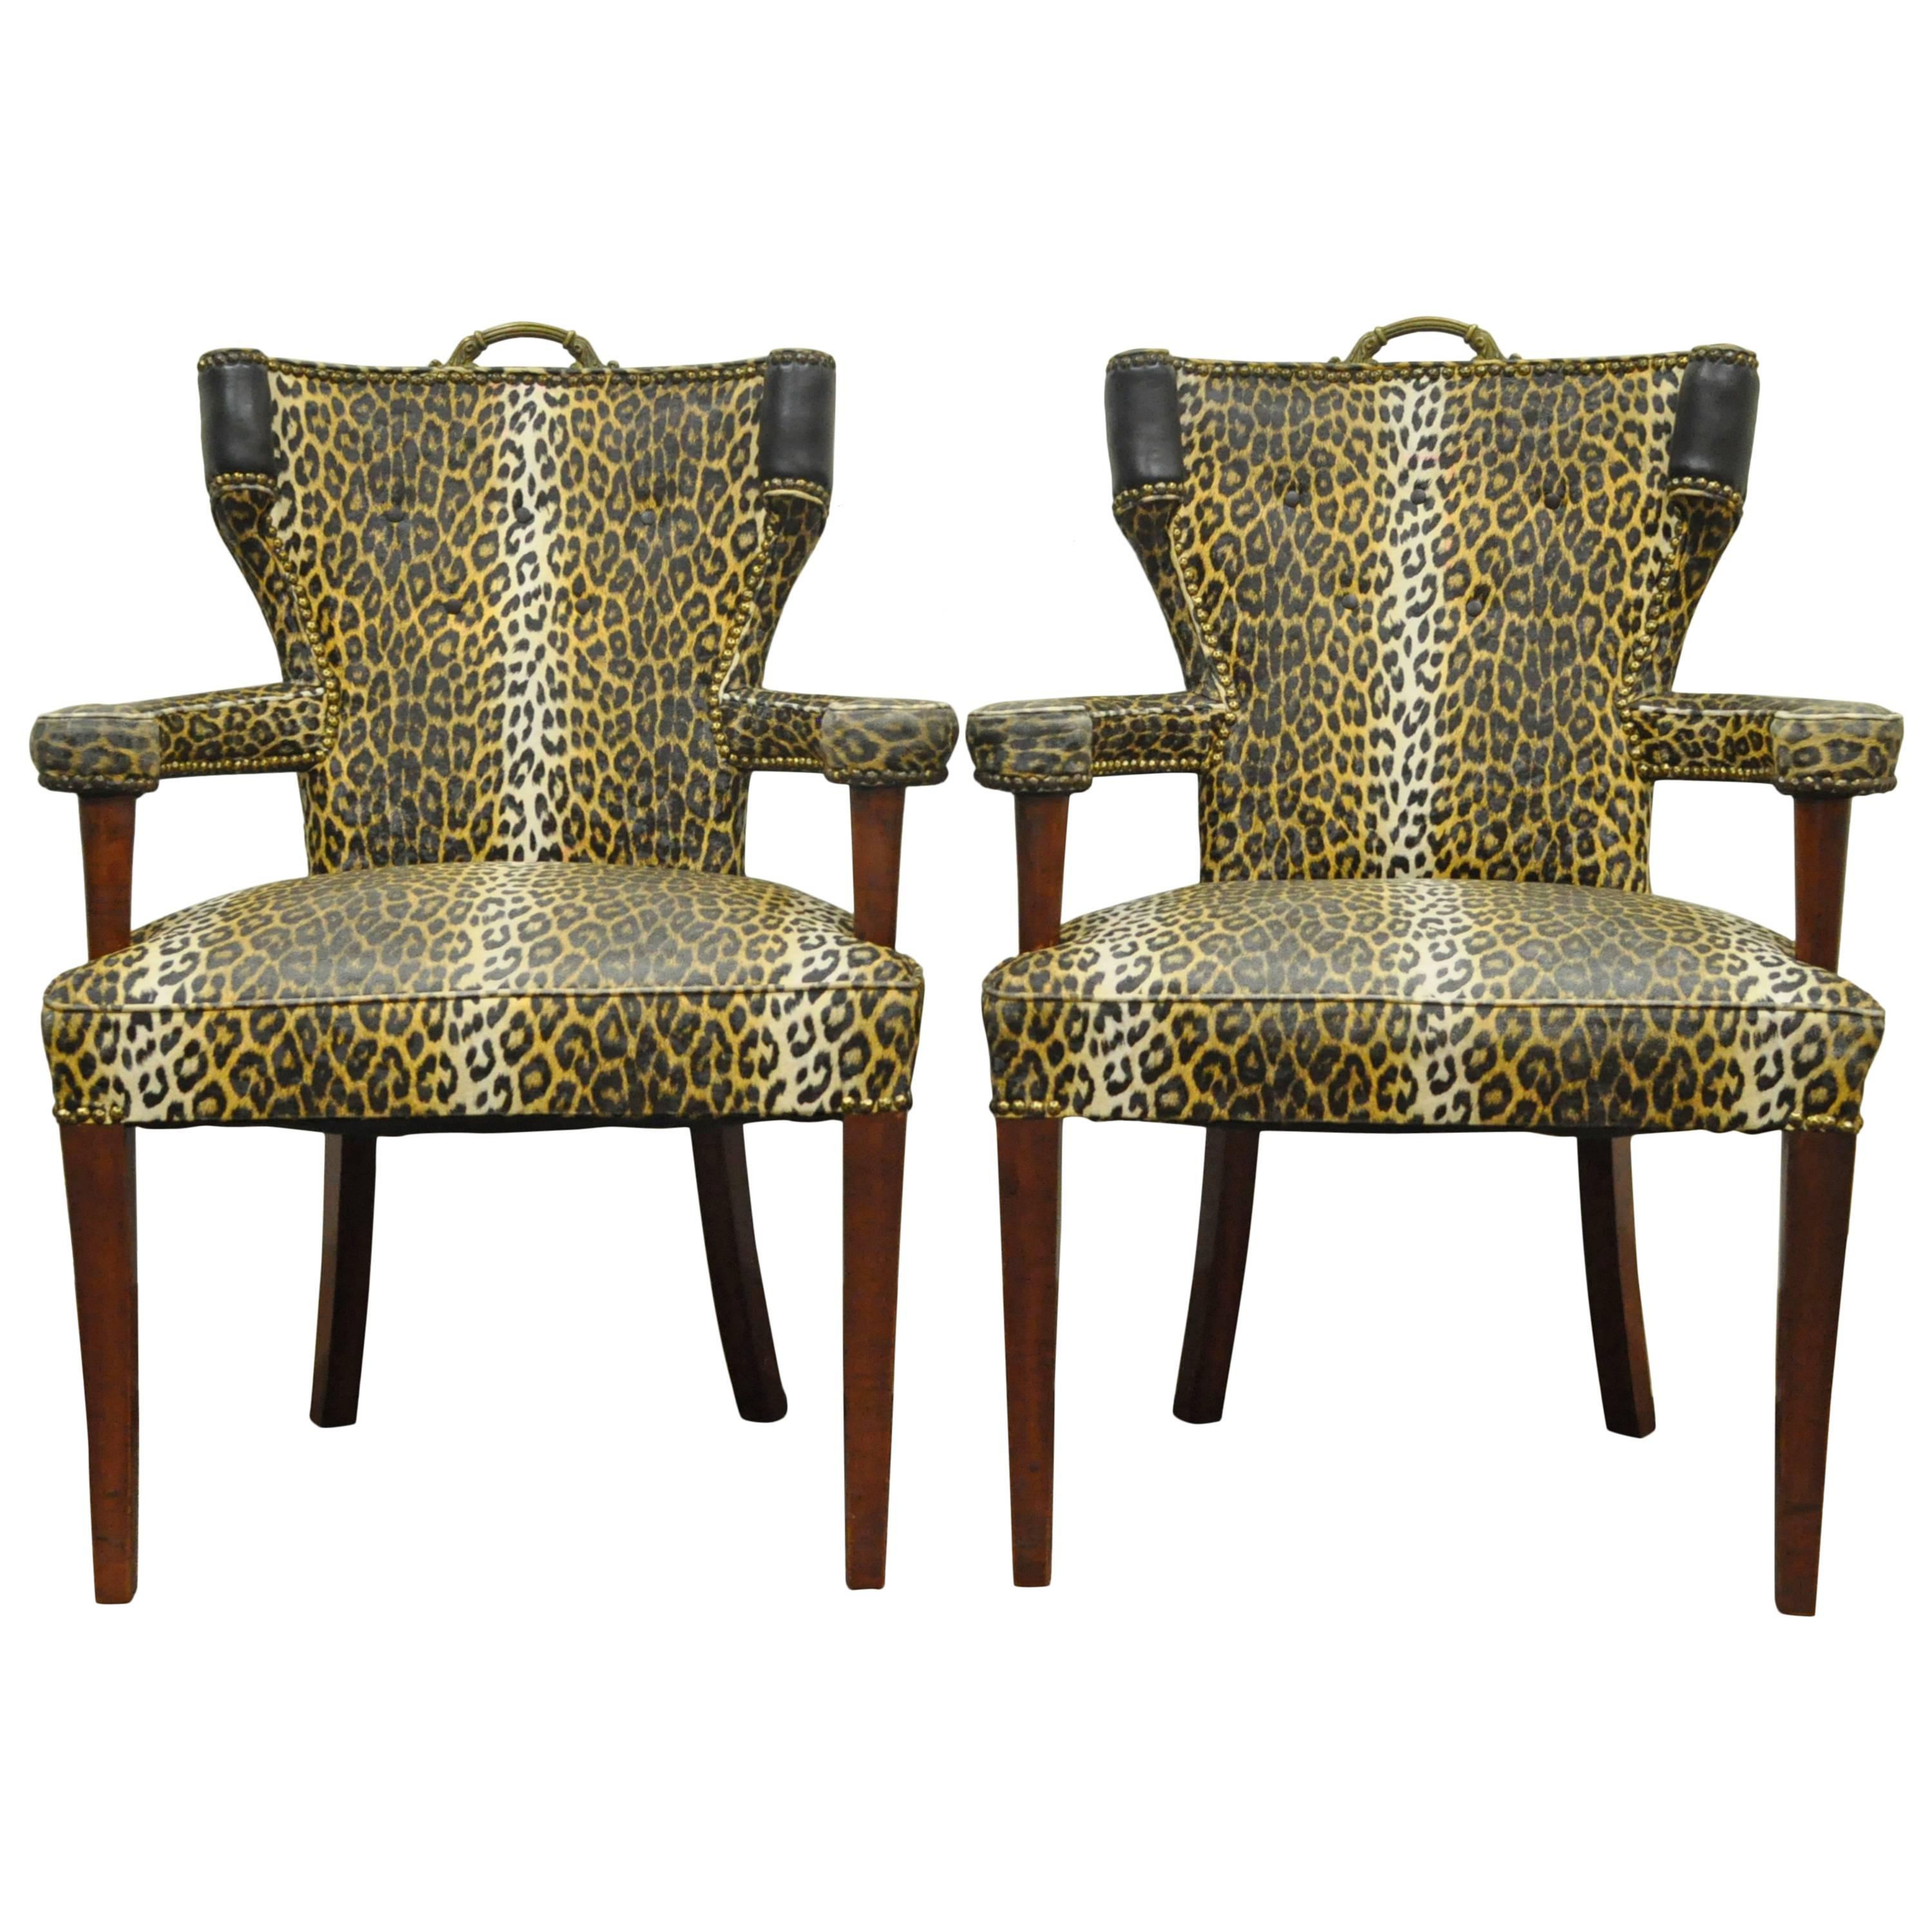 Pair of Dorothy Draper Hollywood Regency Leopard Printed Vinyl Curved Armchairs For Sale